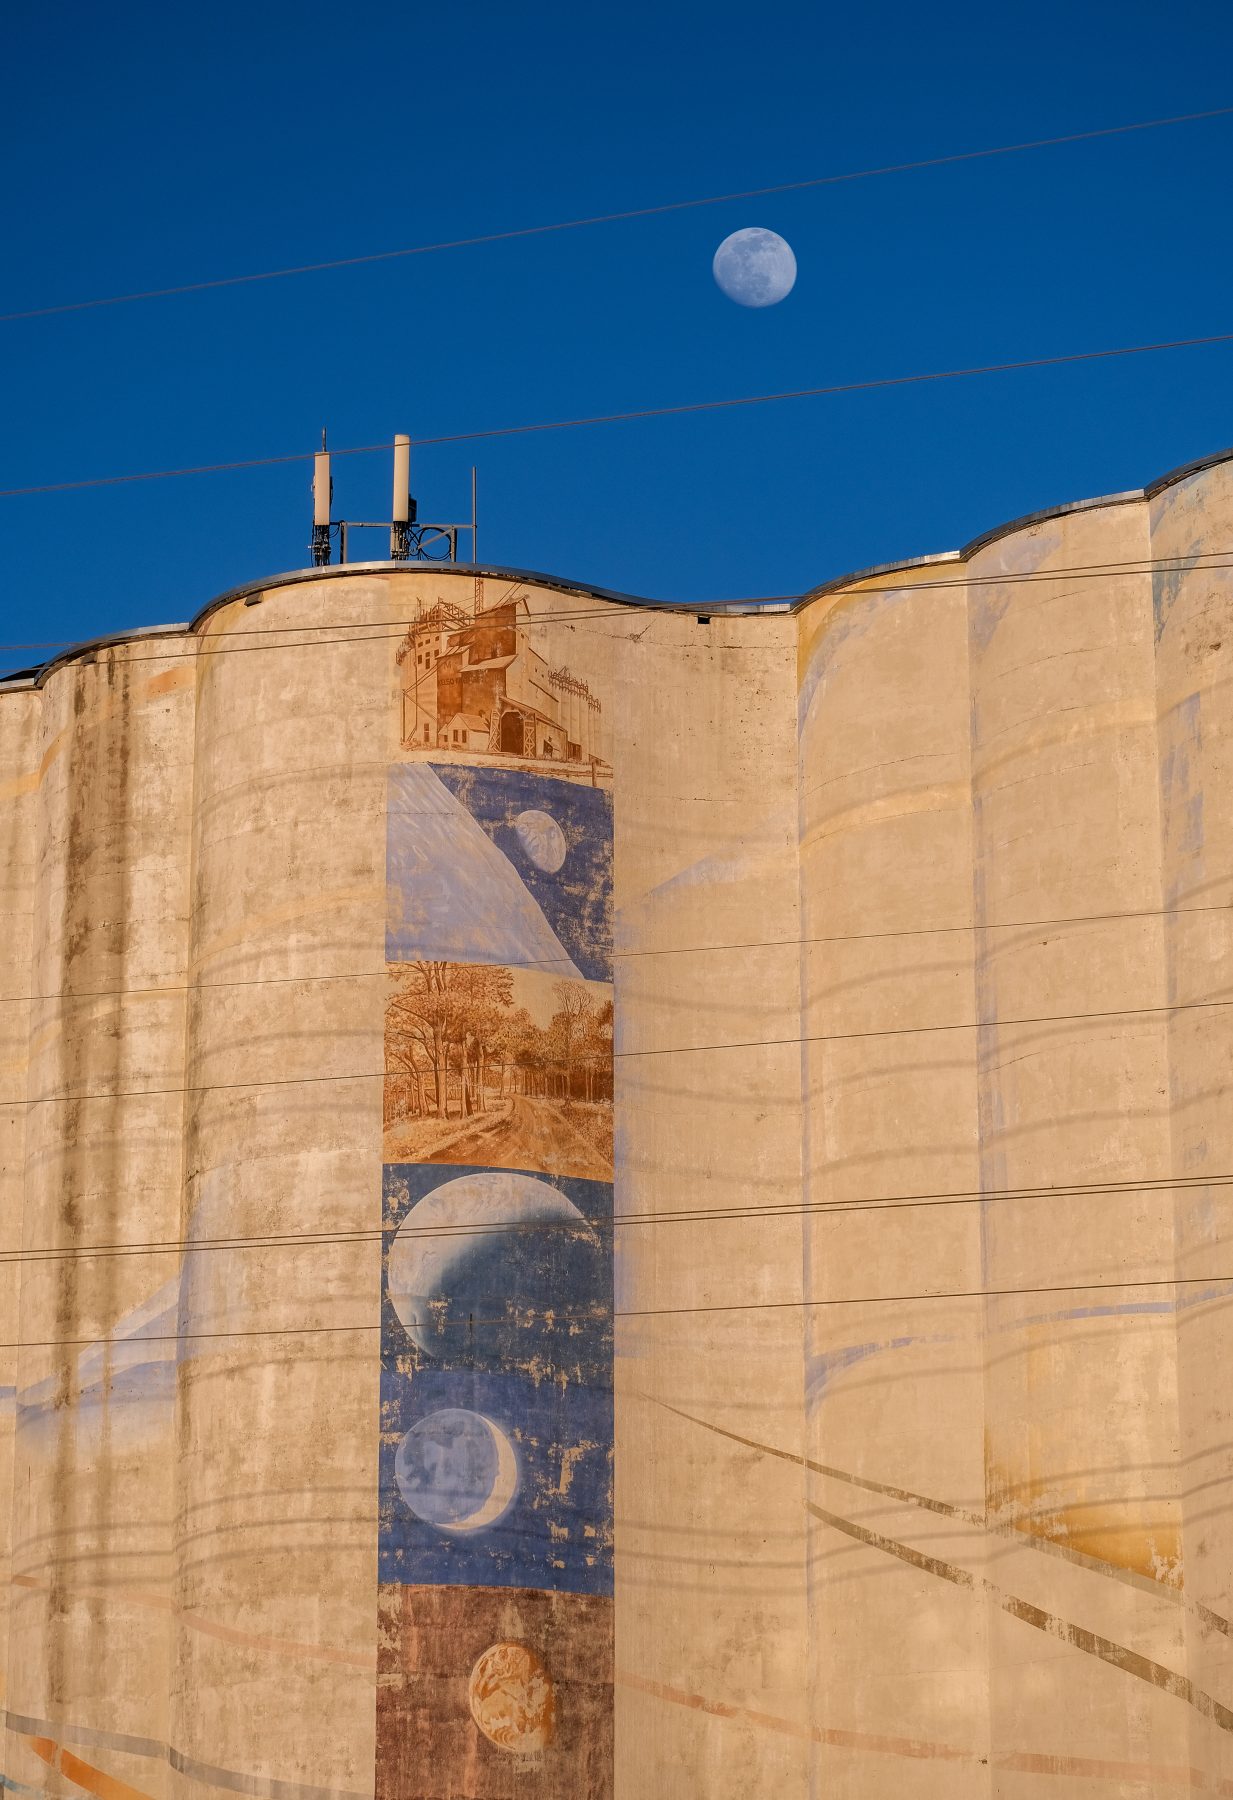 tall columns of grain elevator with vertical mural, moon appears in blue sky above